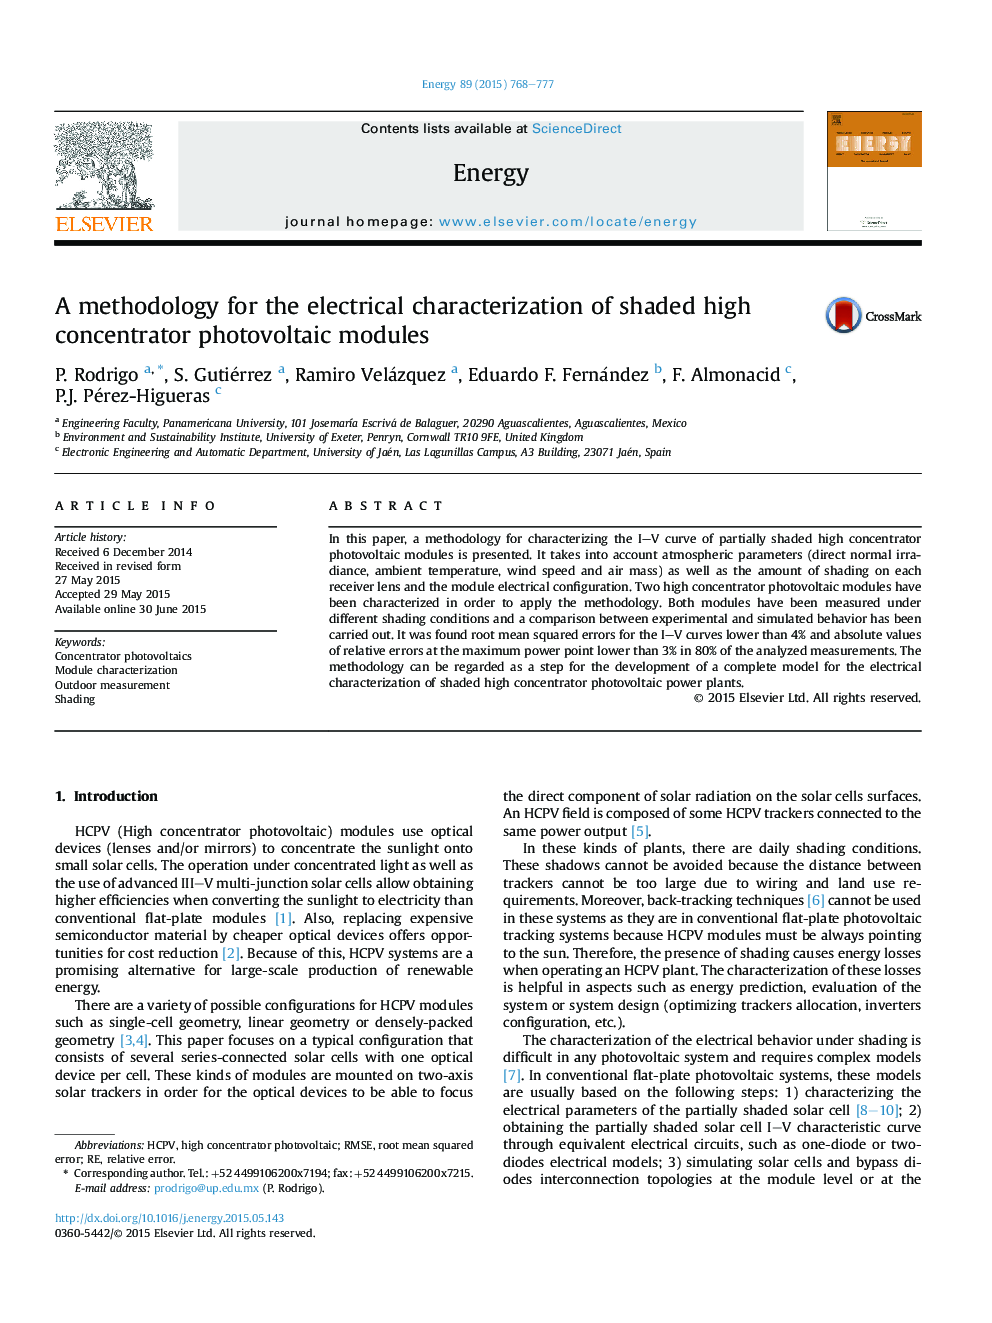 A methodology for the electrical characterization of shaded high concentrator photovoltaic modules